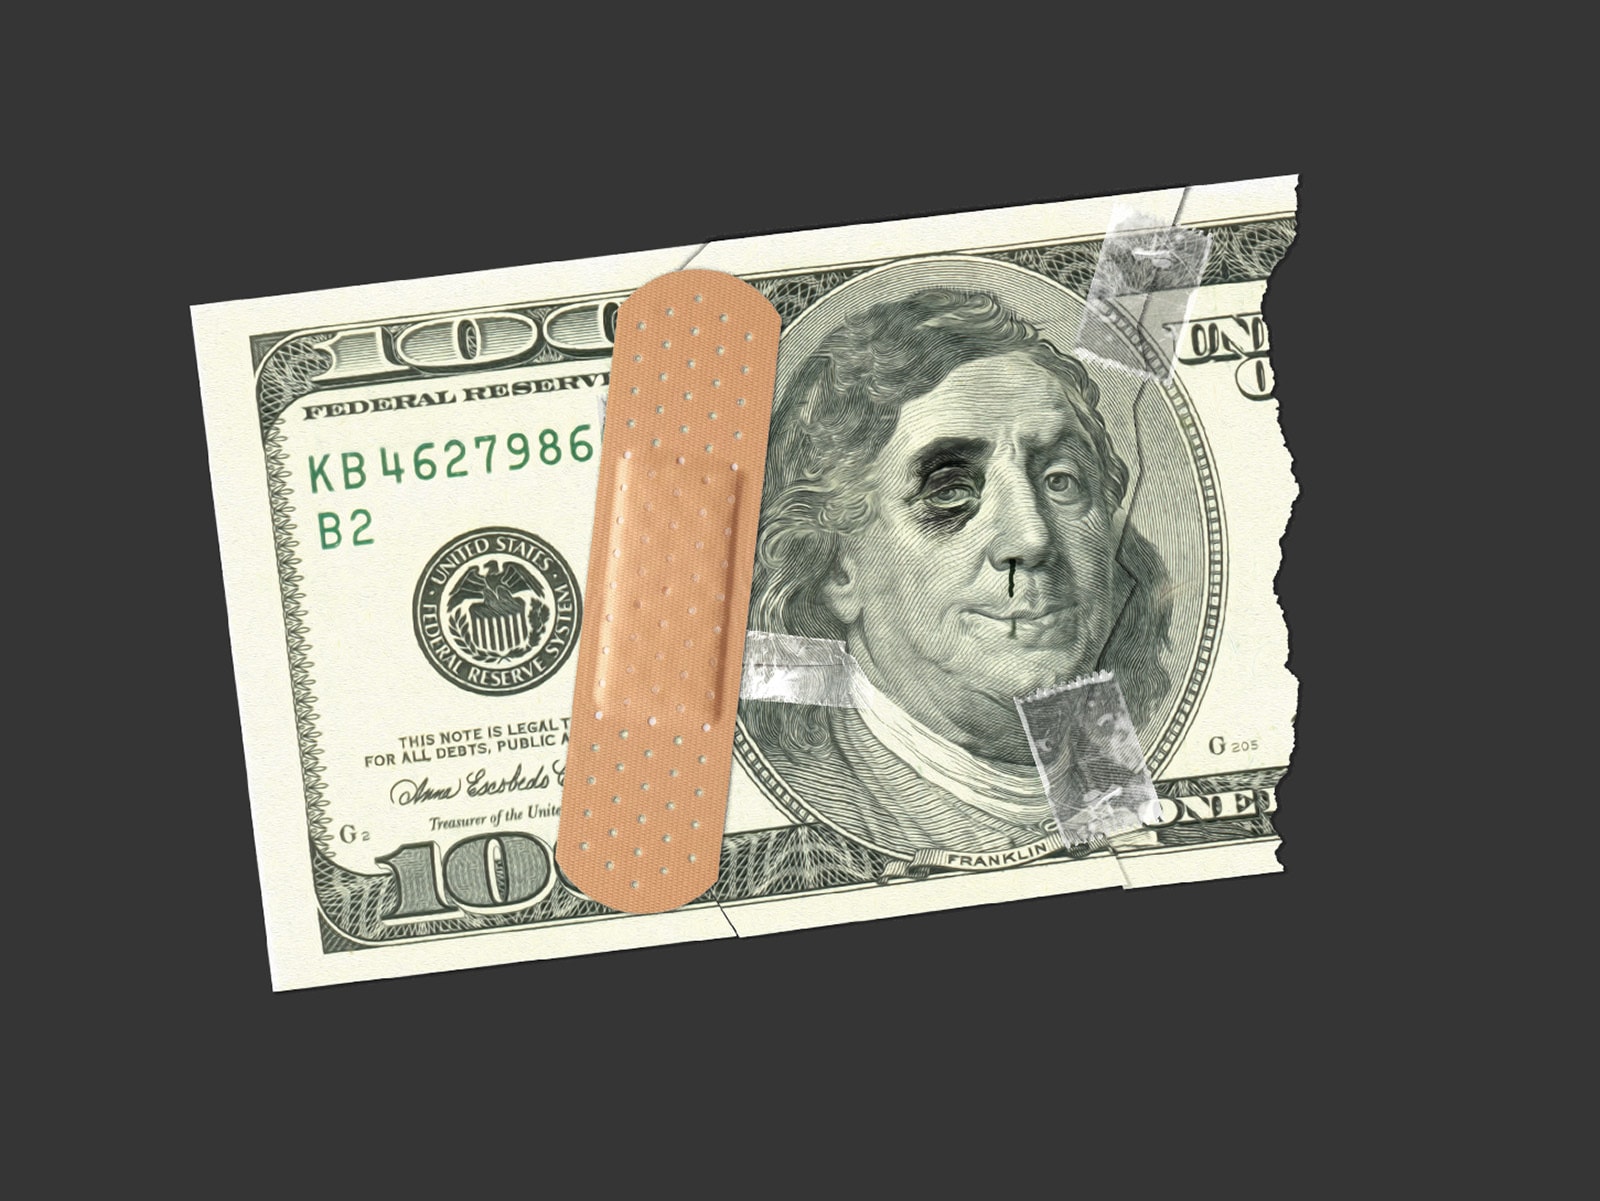 US dollar note with a plaster and a black eye